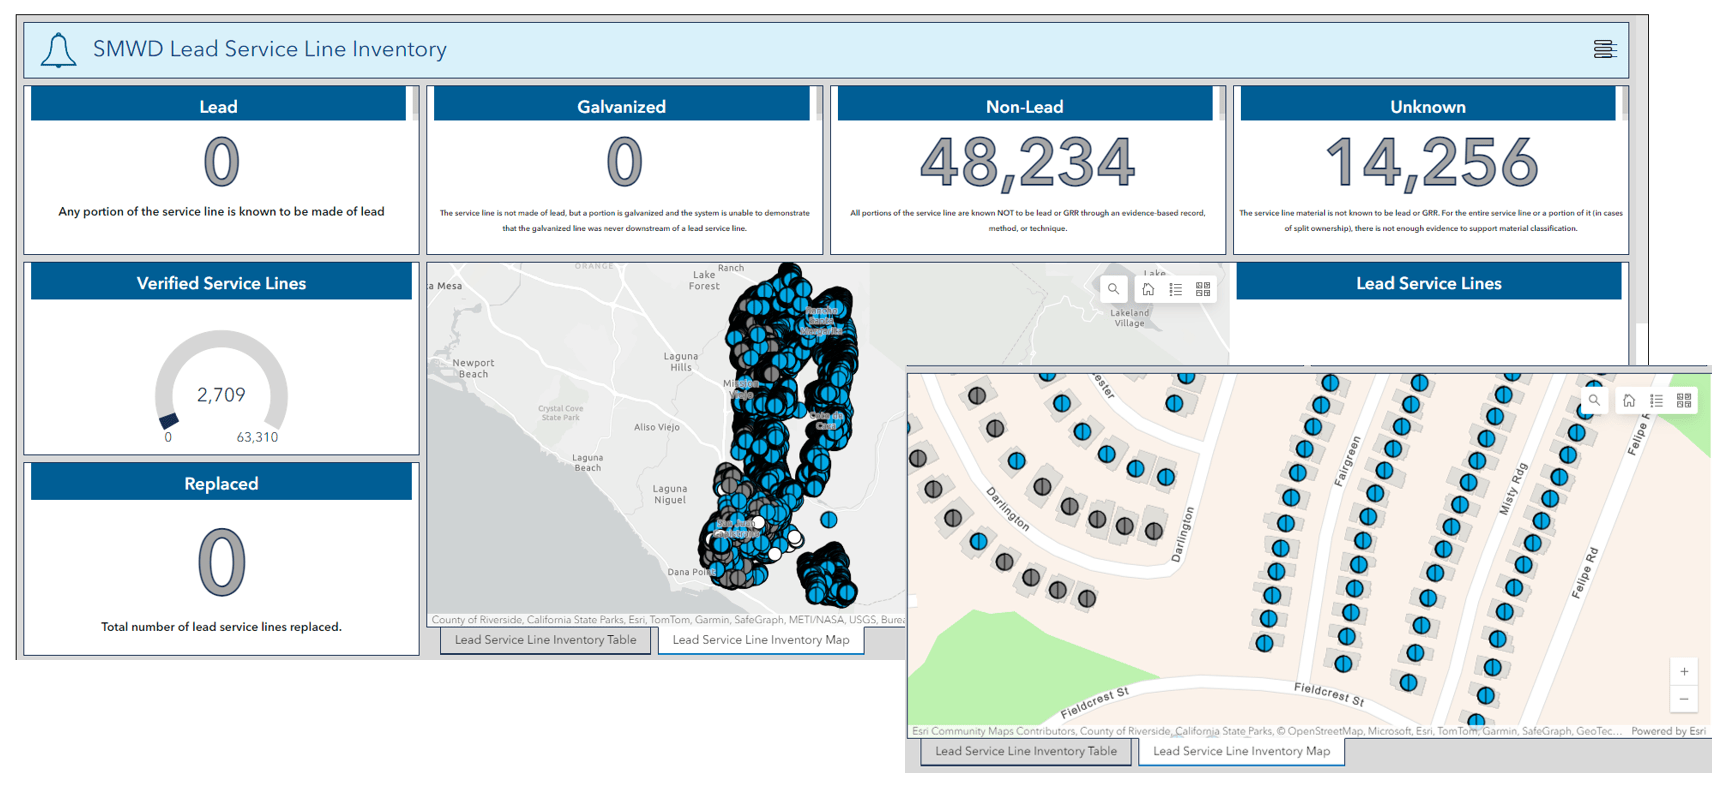 SMWD staff use this dashboard to view and report service line statistics. Click on the image to learn more about their utilization of ArcGIS technology to prepare for the LCRR deadline.